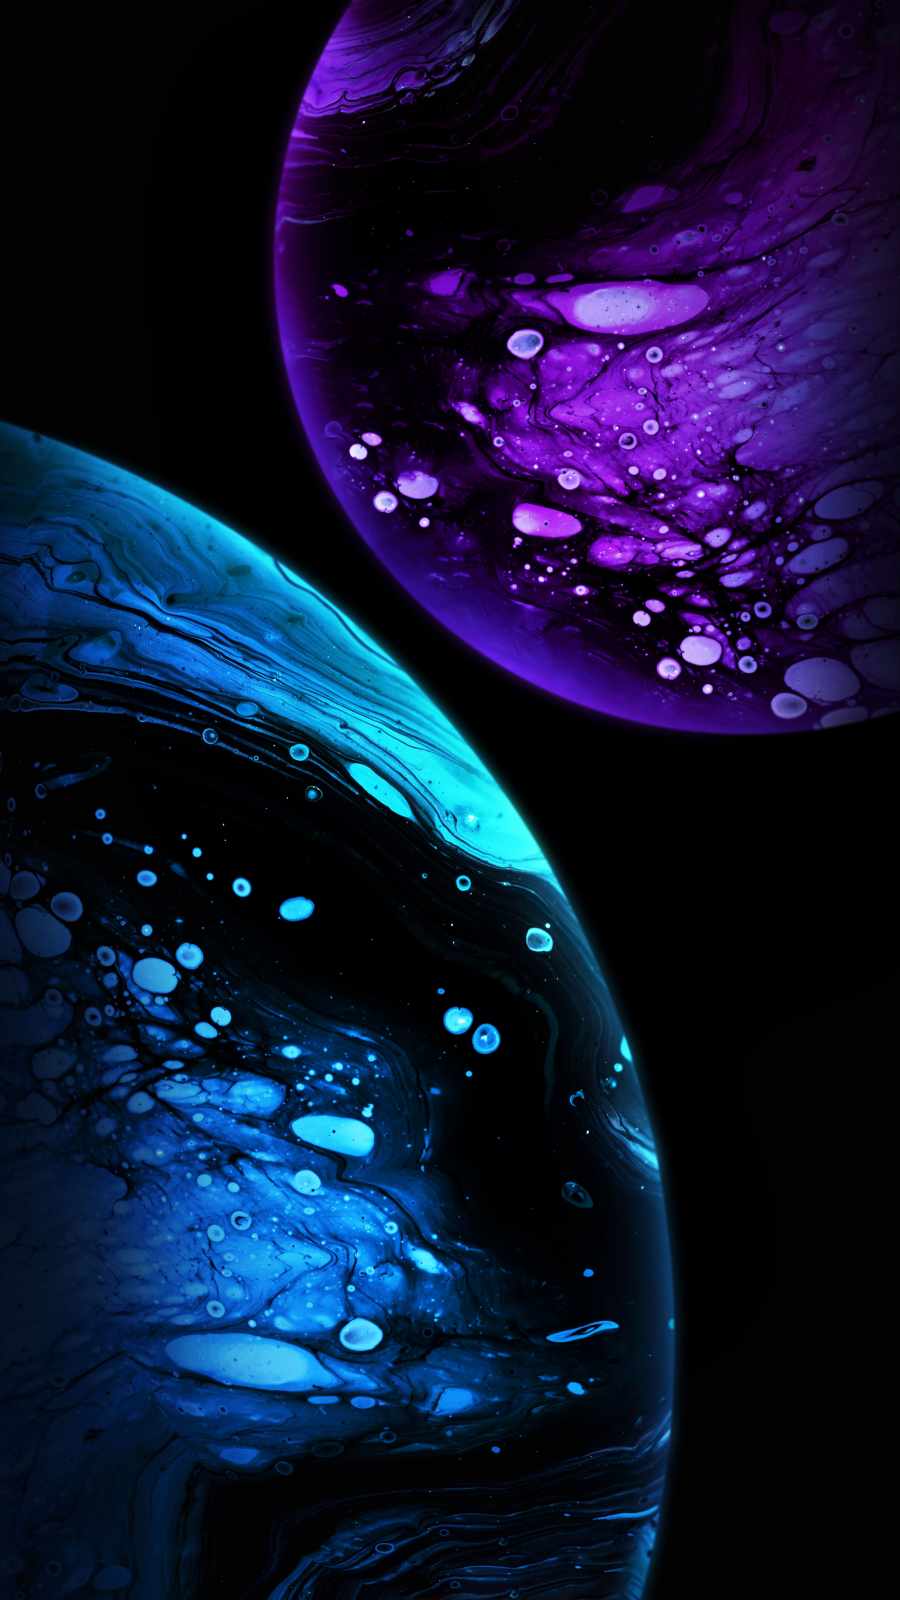 Amoled Space Planet IPhone Wallpaper - IPhone Wallpapers : iPhone Wallpapers